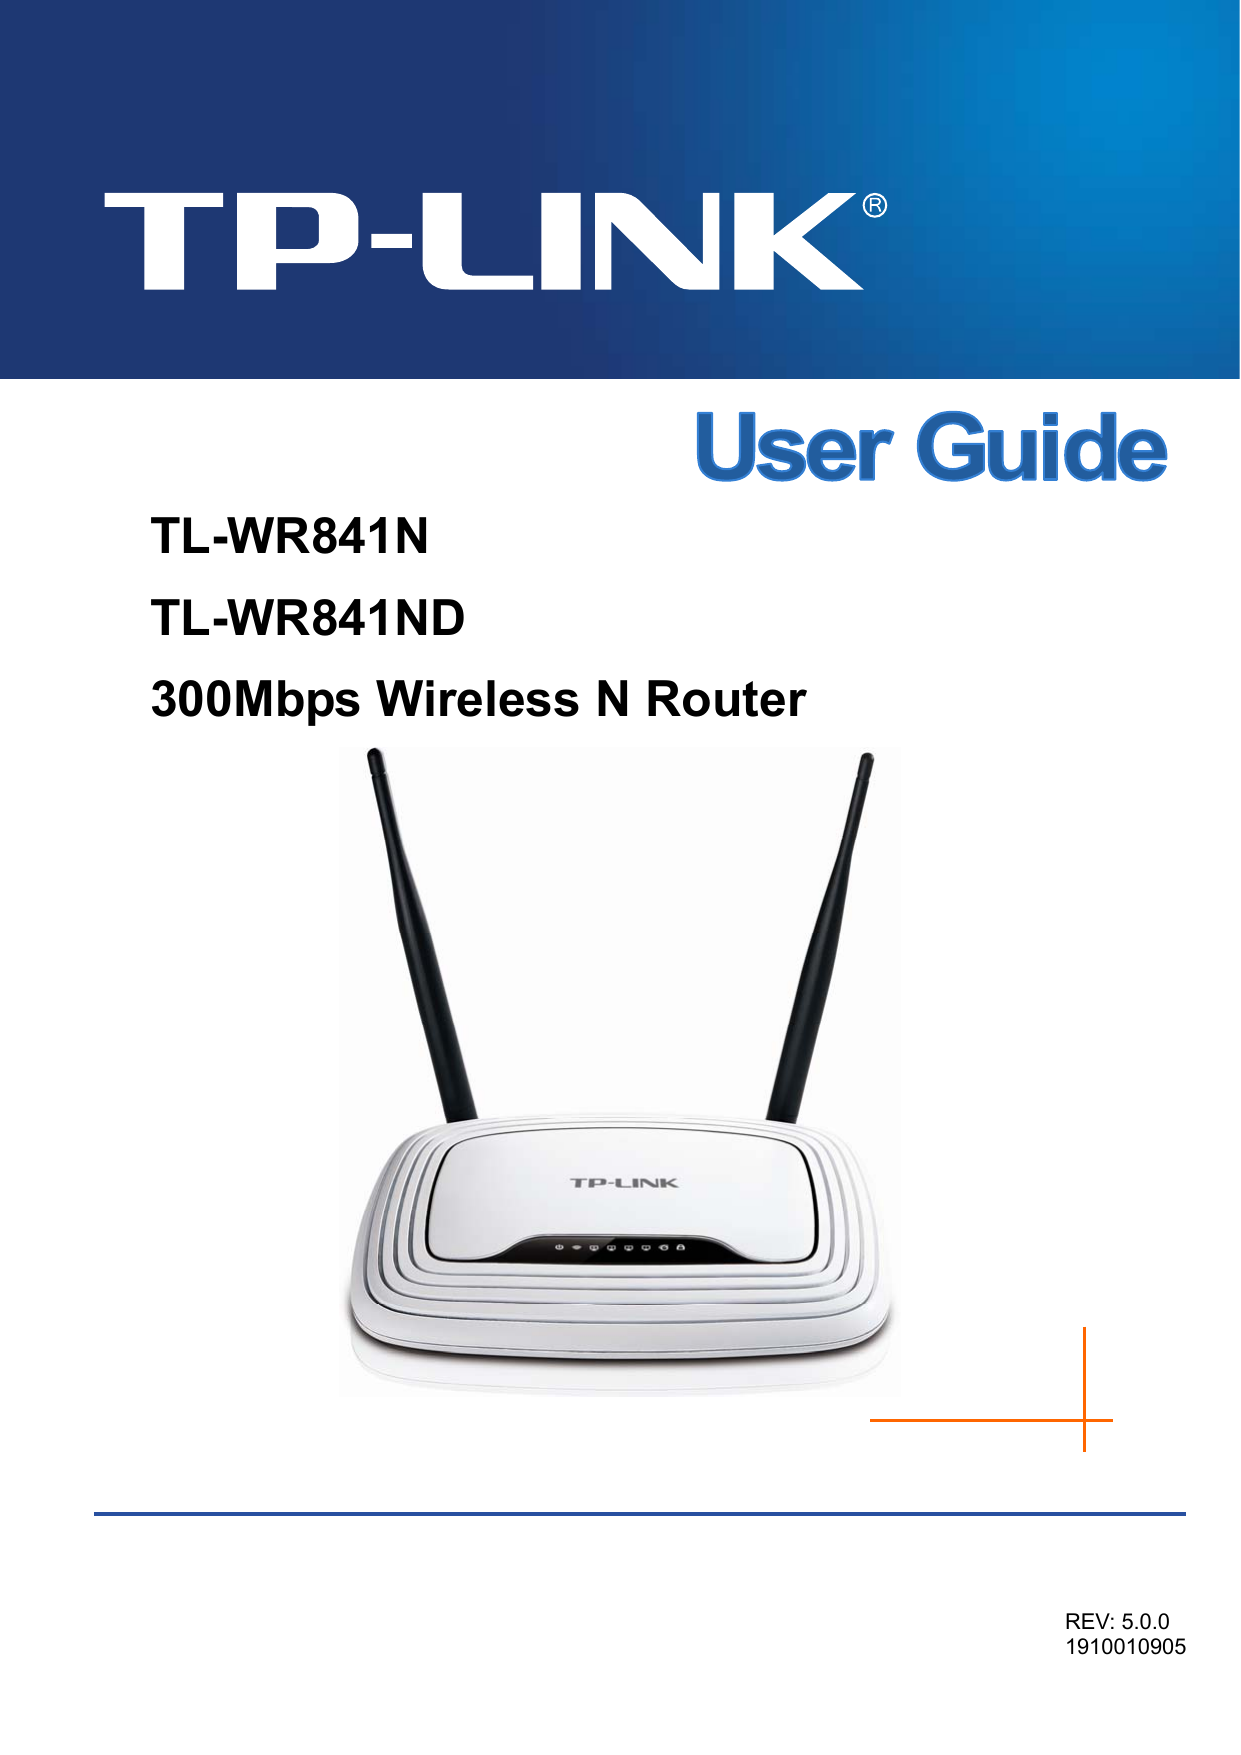   TL-WR841N TL-WR841ND 300Mbps Wireless N Router   REV: 5.0.0 1910010905    